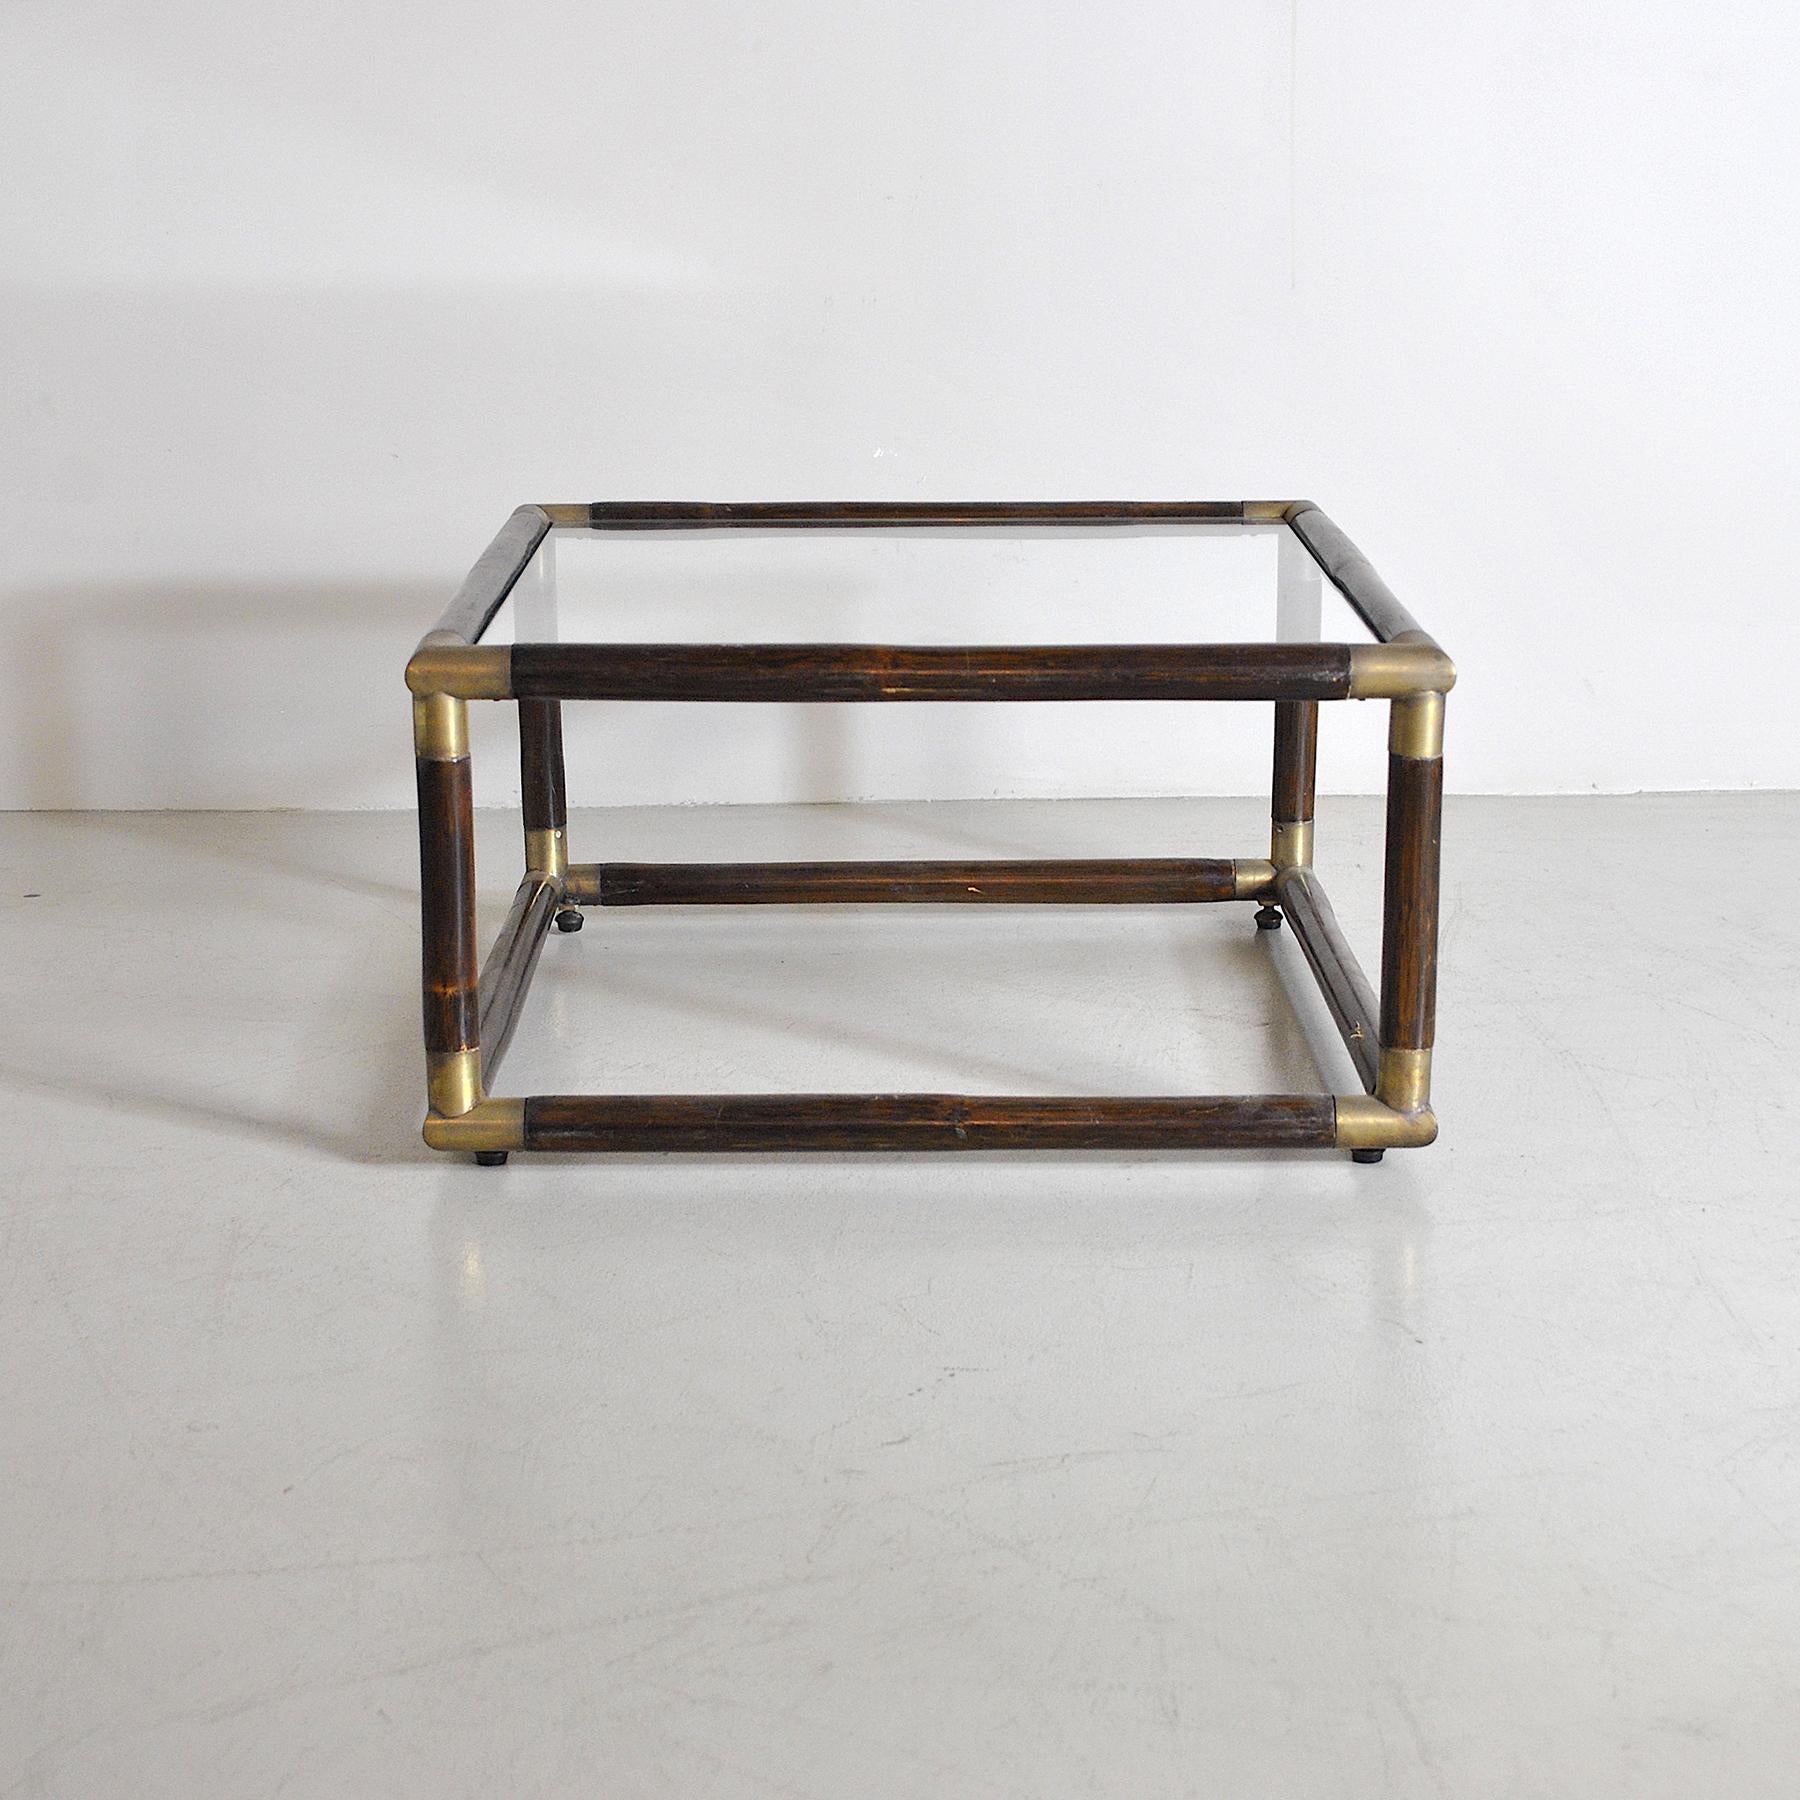 Coffee table in bamboo and brass by Tommaso Barbi from the 1970s.